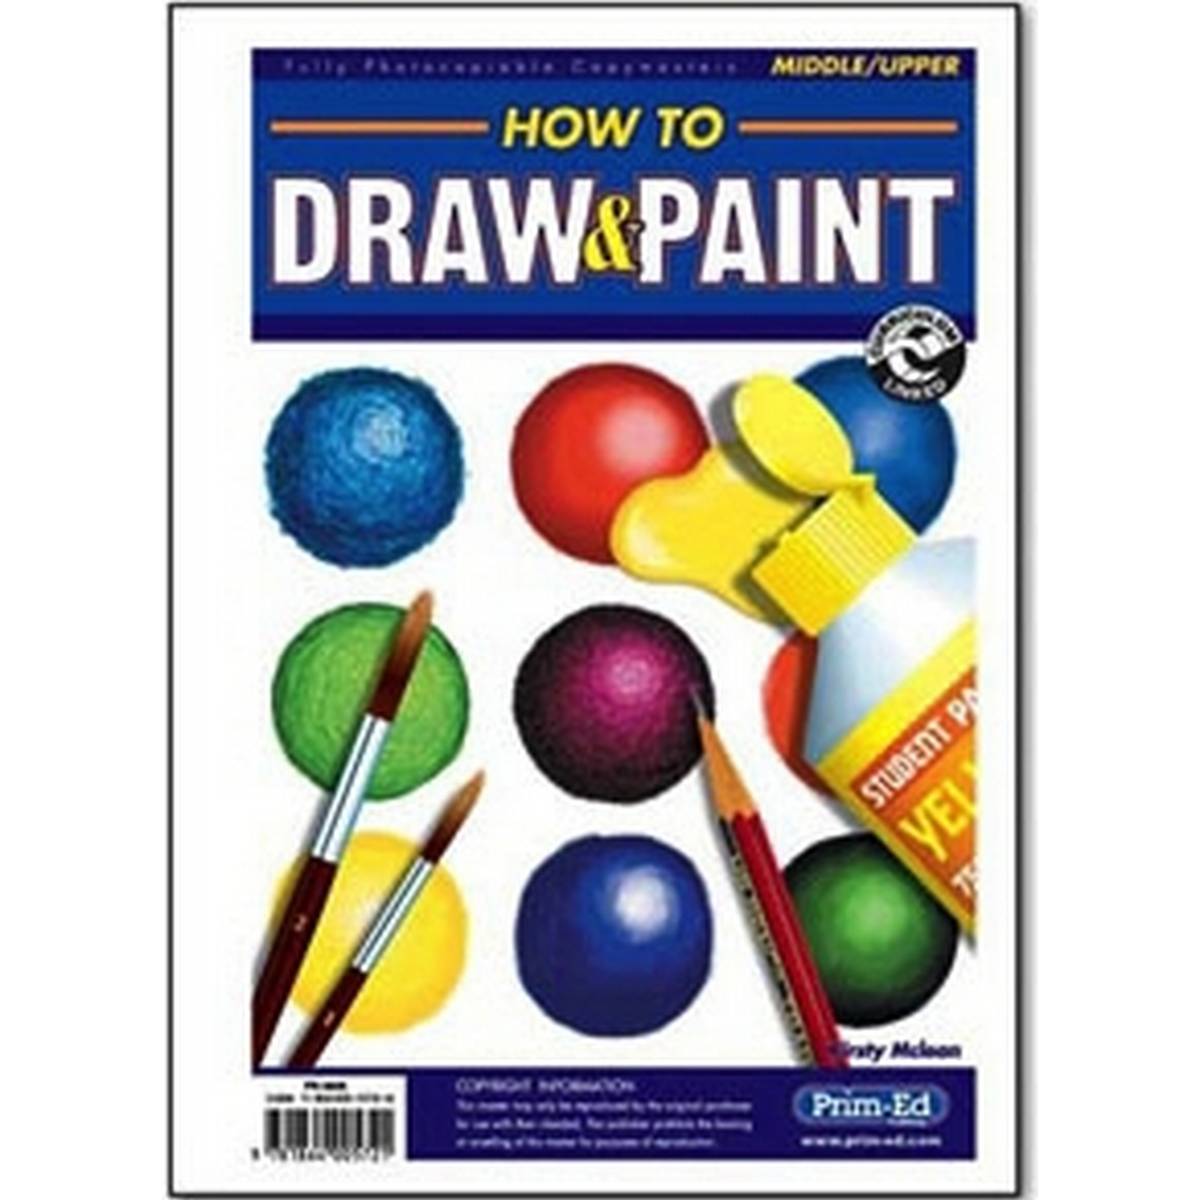 How To Draw and Paint